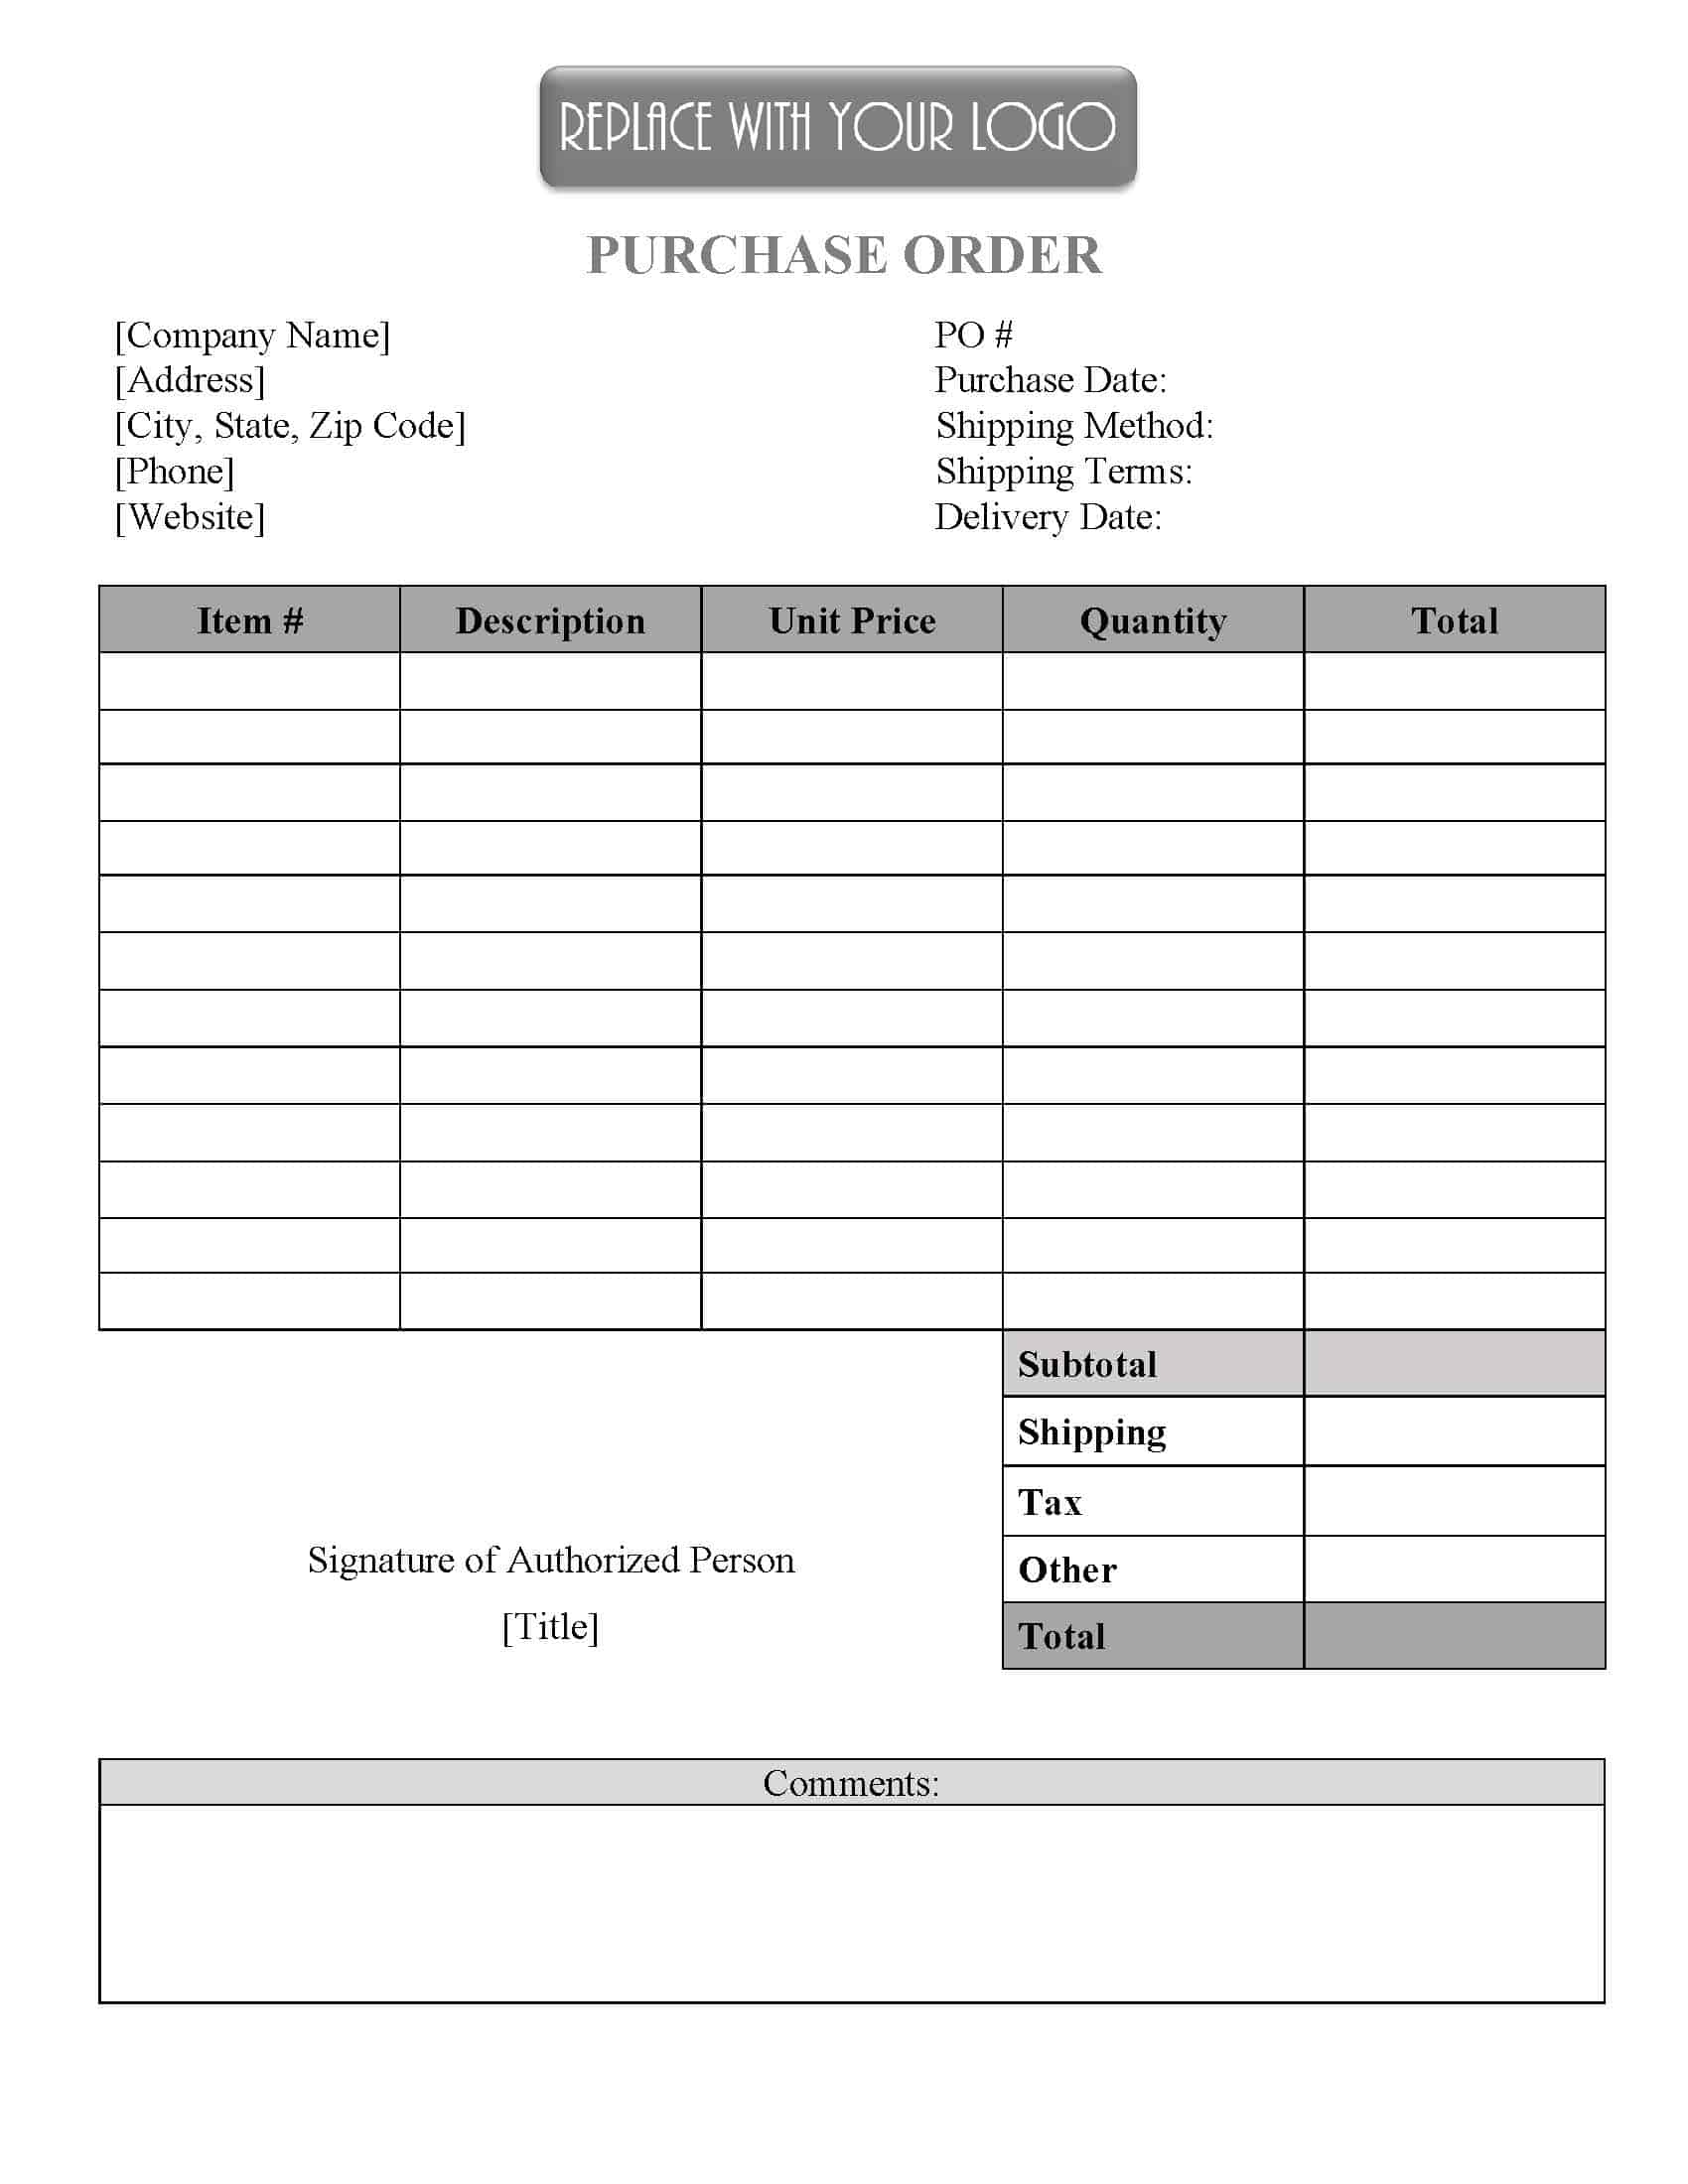 FREE Purchase Order Template Instant Download